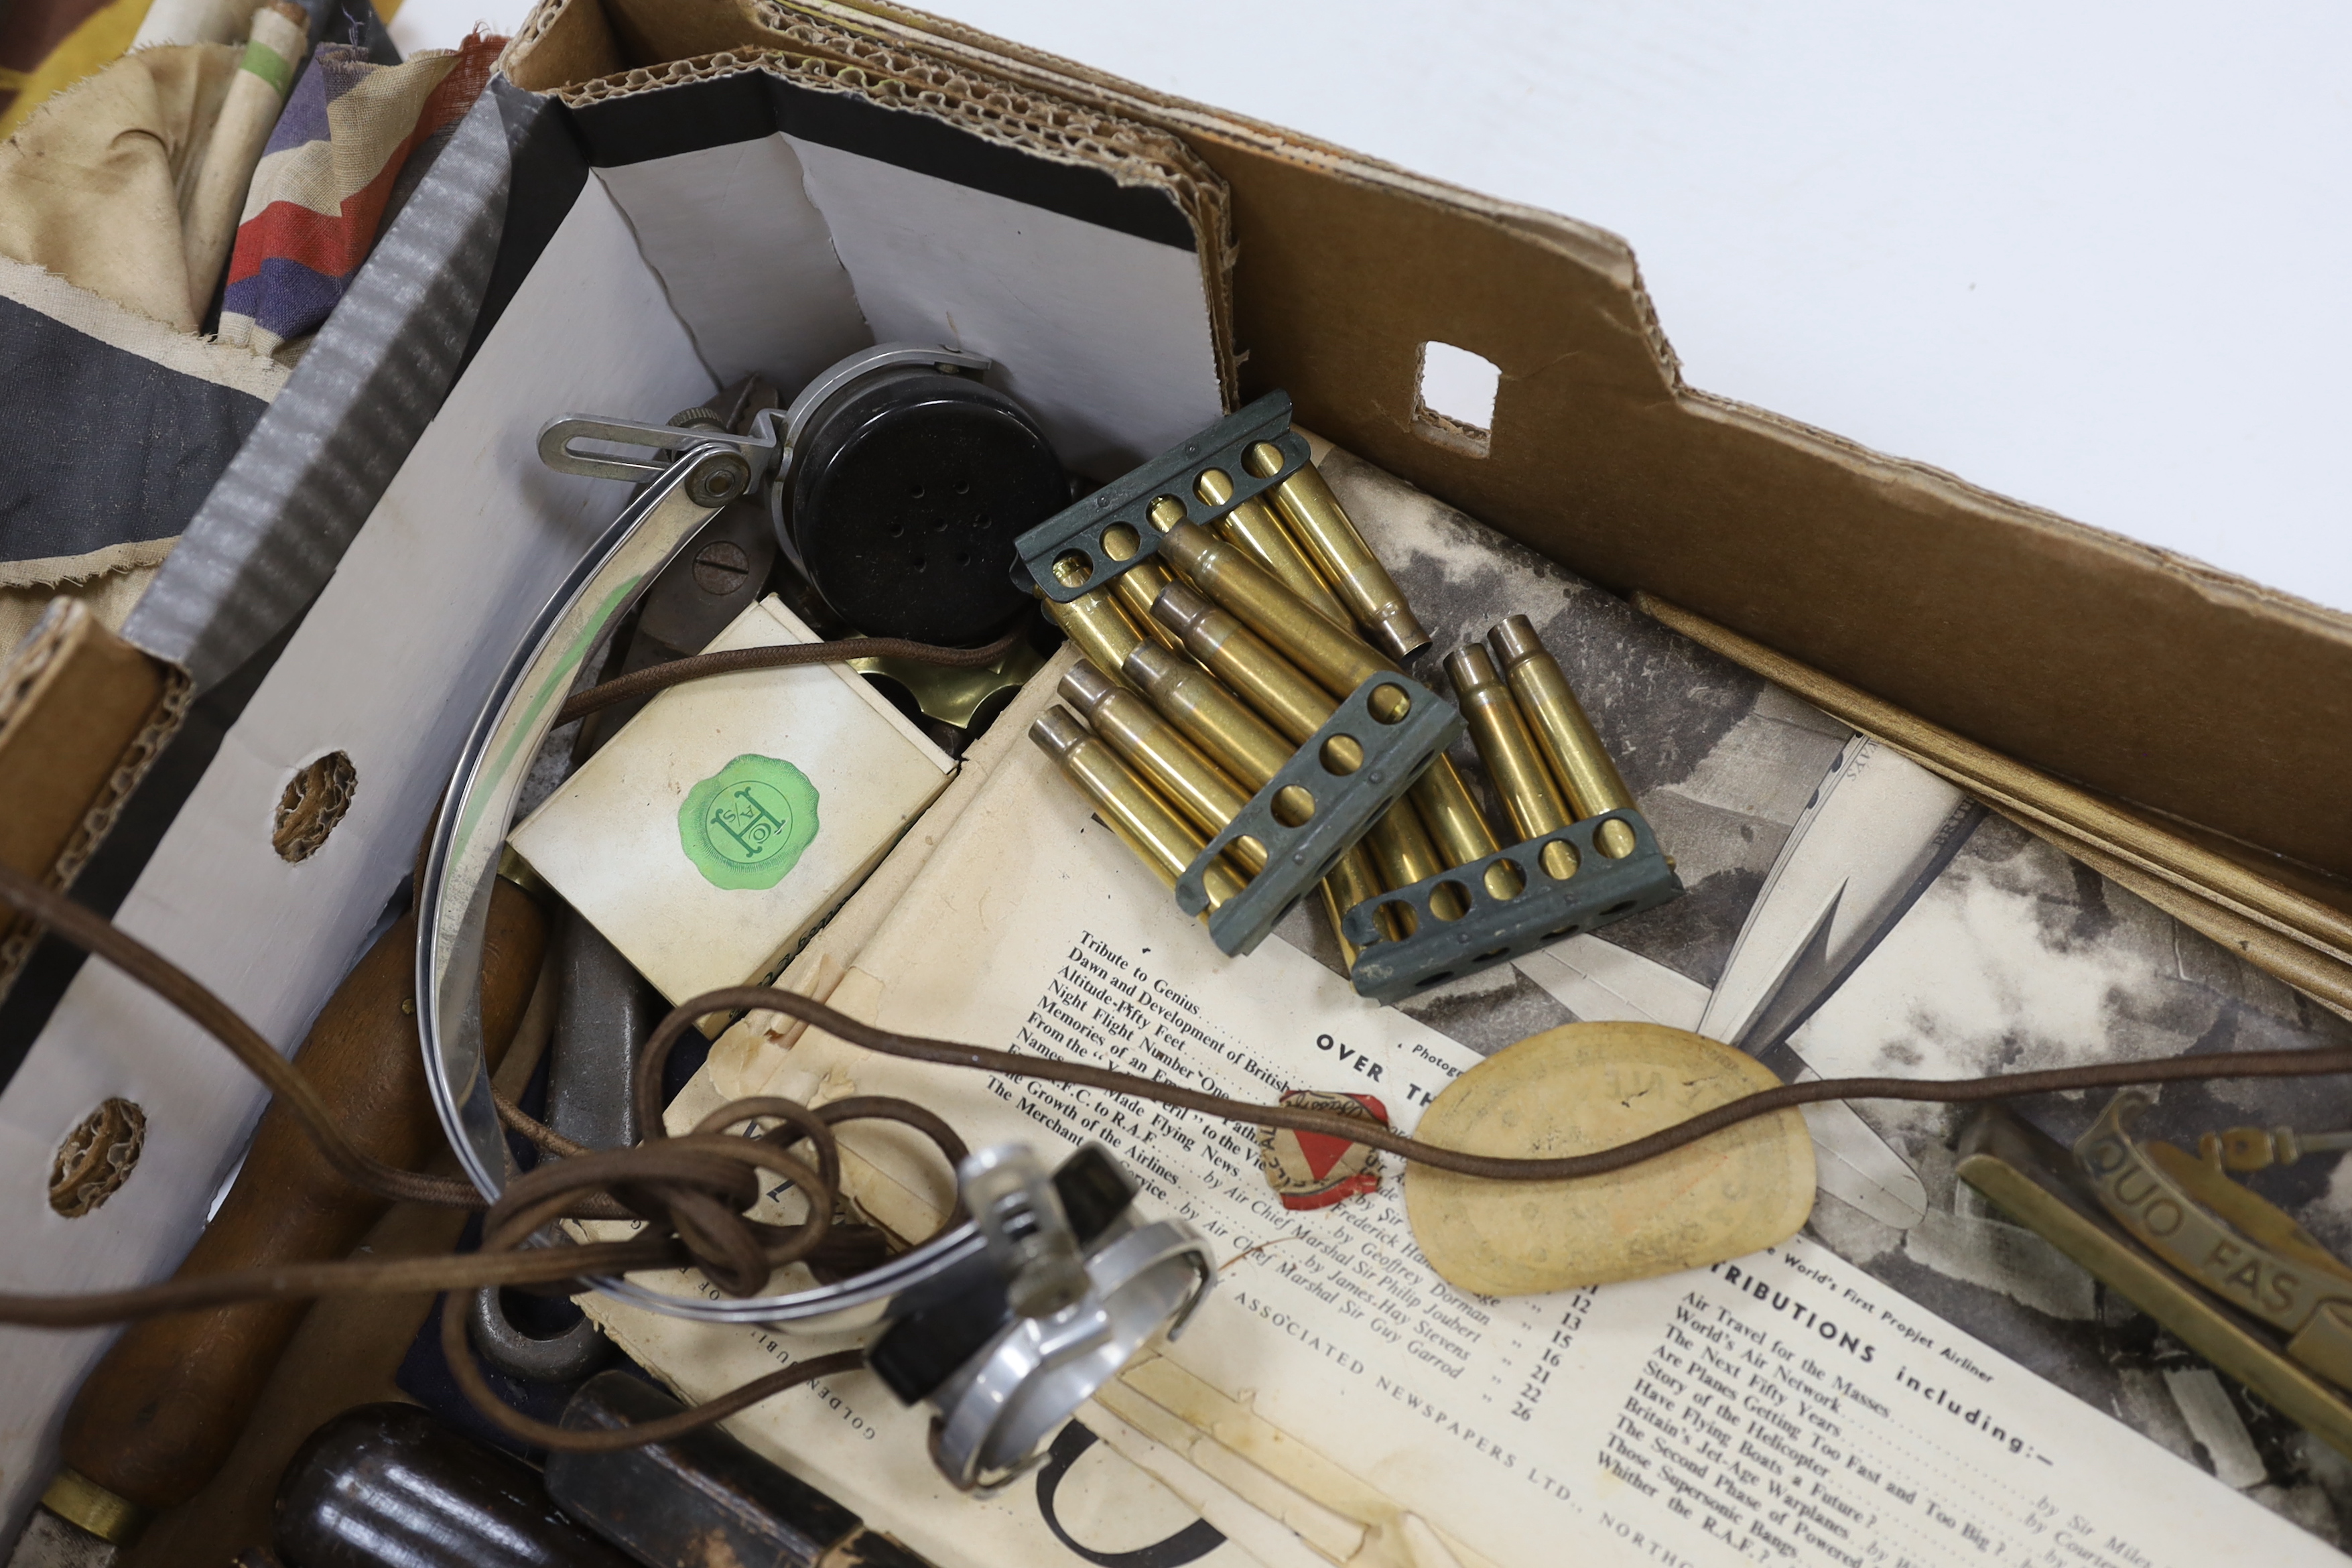 A collection of Militaria and other items, including a Royal Artillery brass cased timepiece, headphones, crepe paper bunting contained in a card Worthington’s IPA beer bottle, etc.